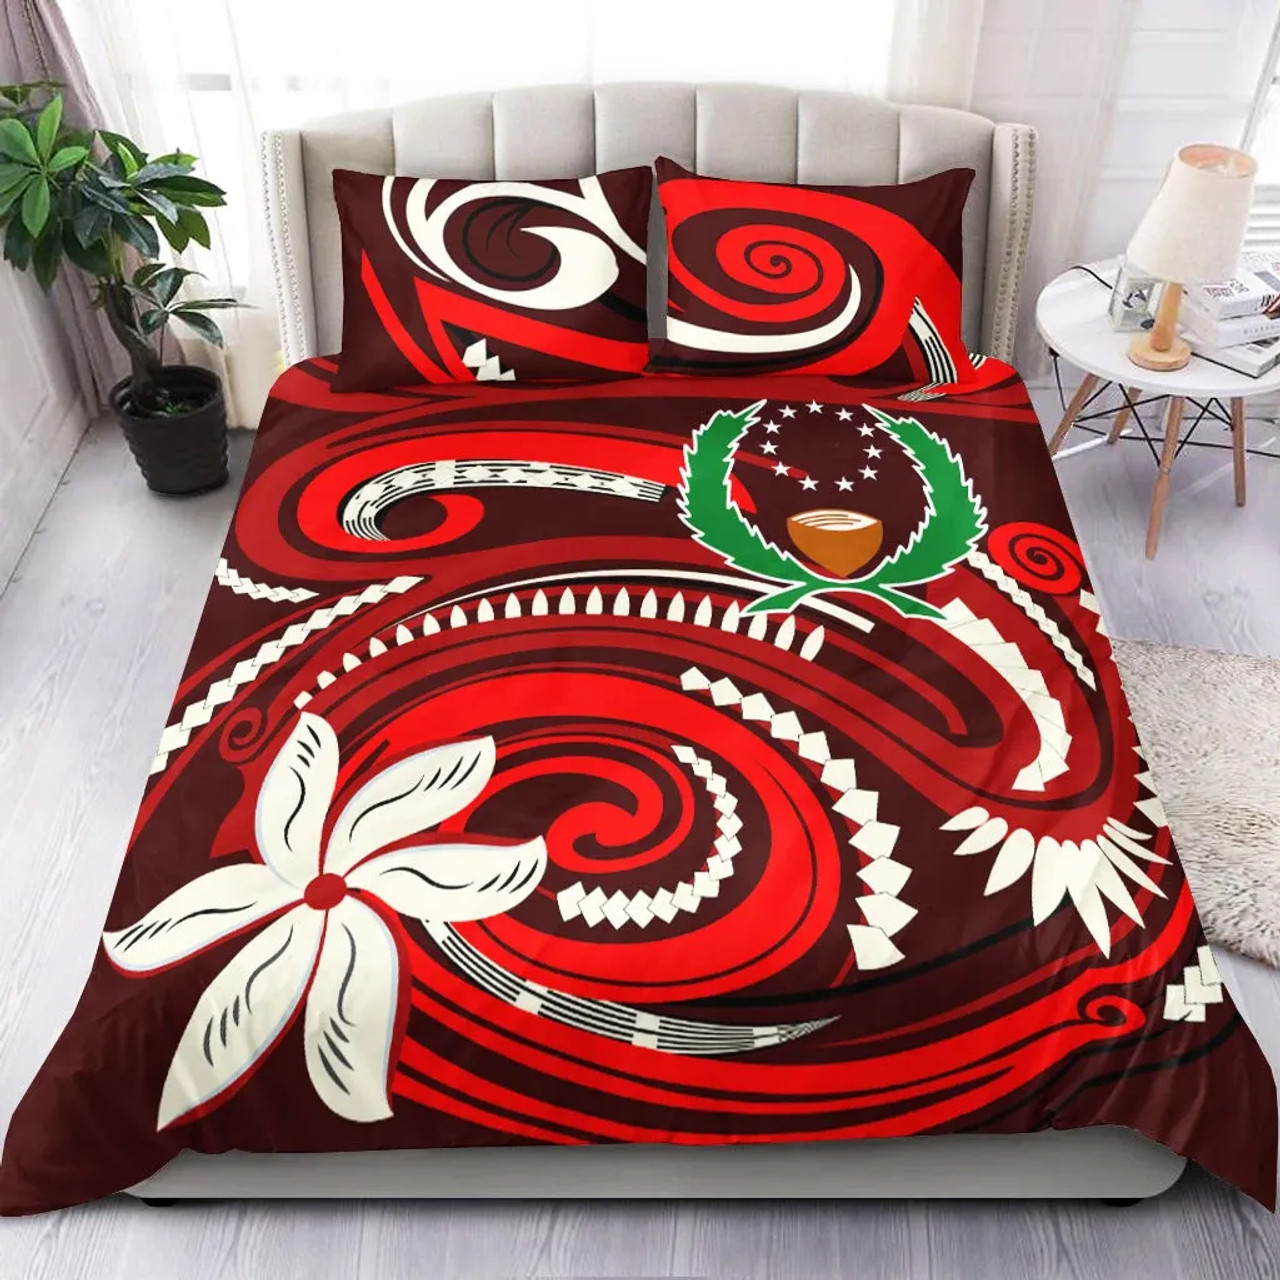 Pohnpei Bedding Set - Vortex Style Red Color 1